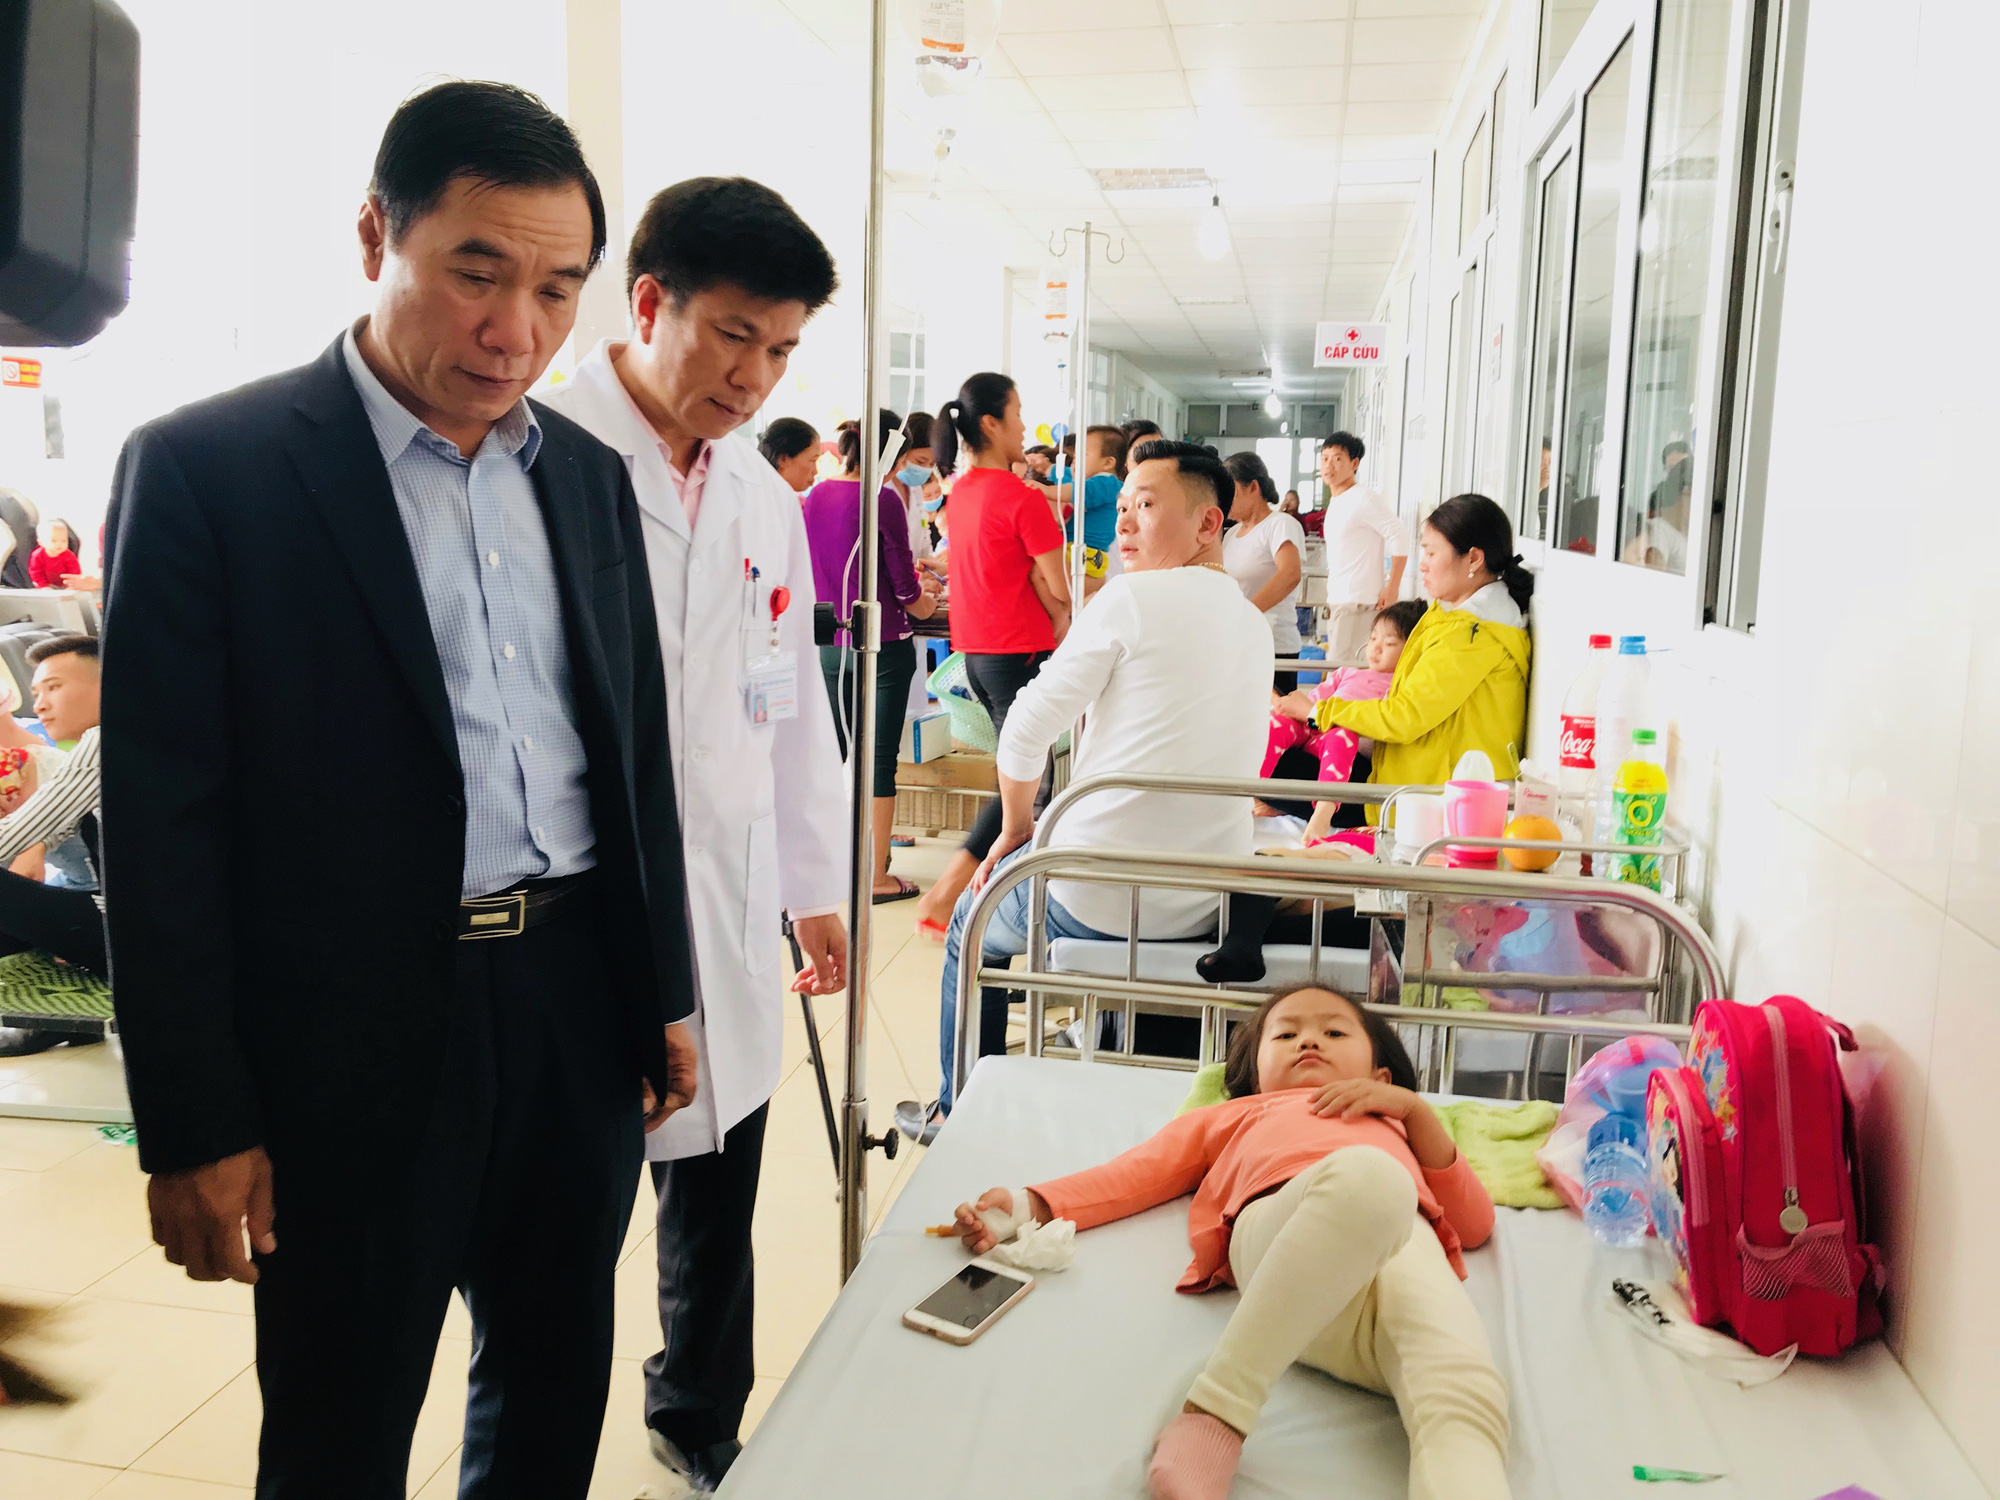 Pham Dang Quyen, vice chairman of the Thanh Hoa People’s Committee, visits young patients at the hospital. Photo: Ha Dong / Tuoi Tre